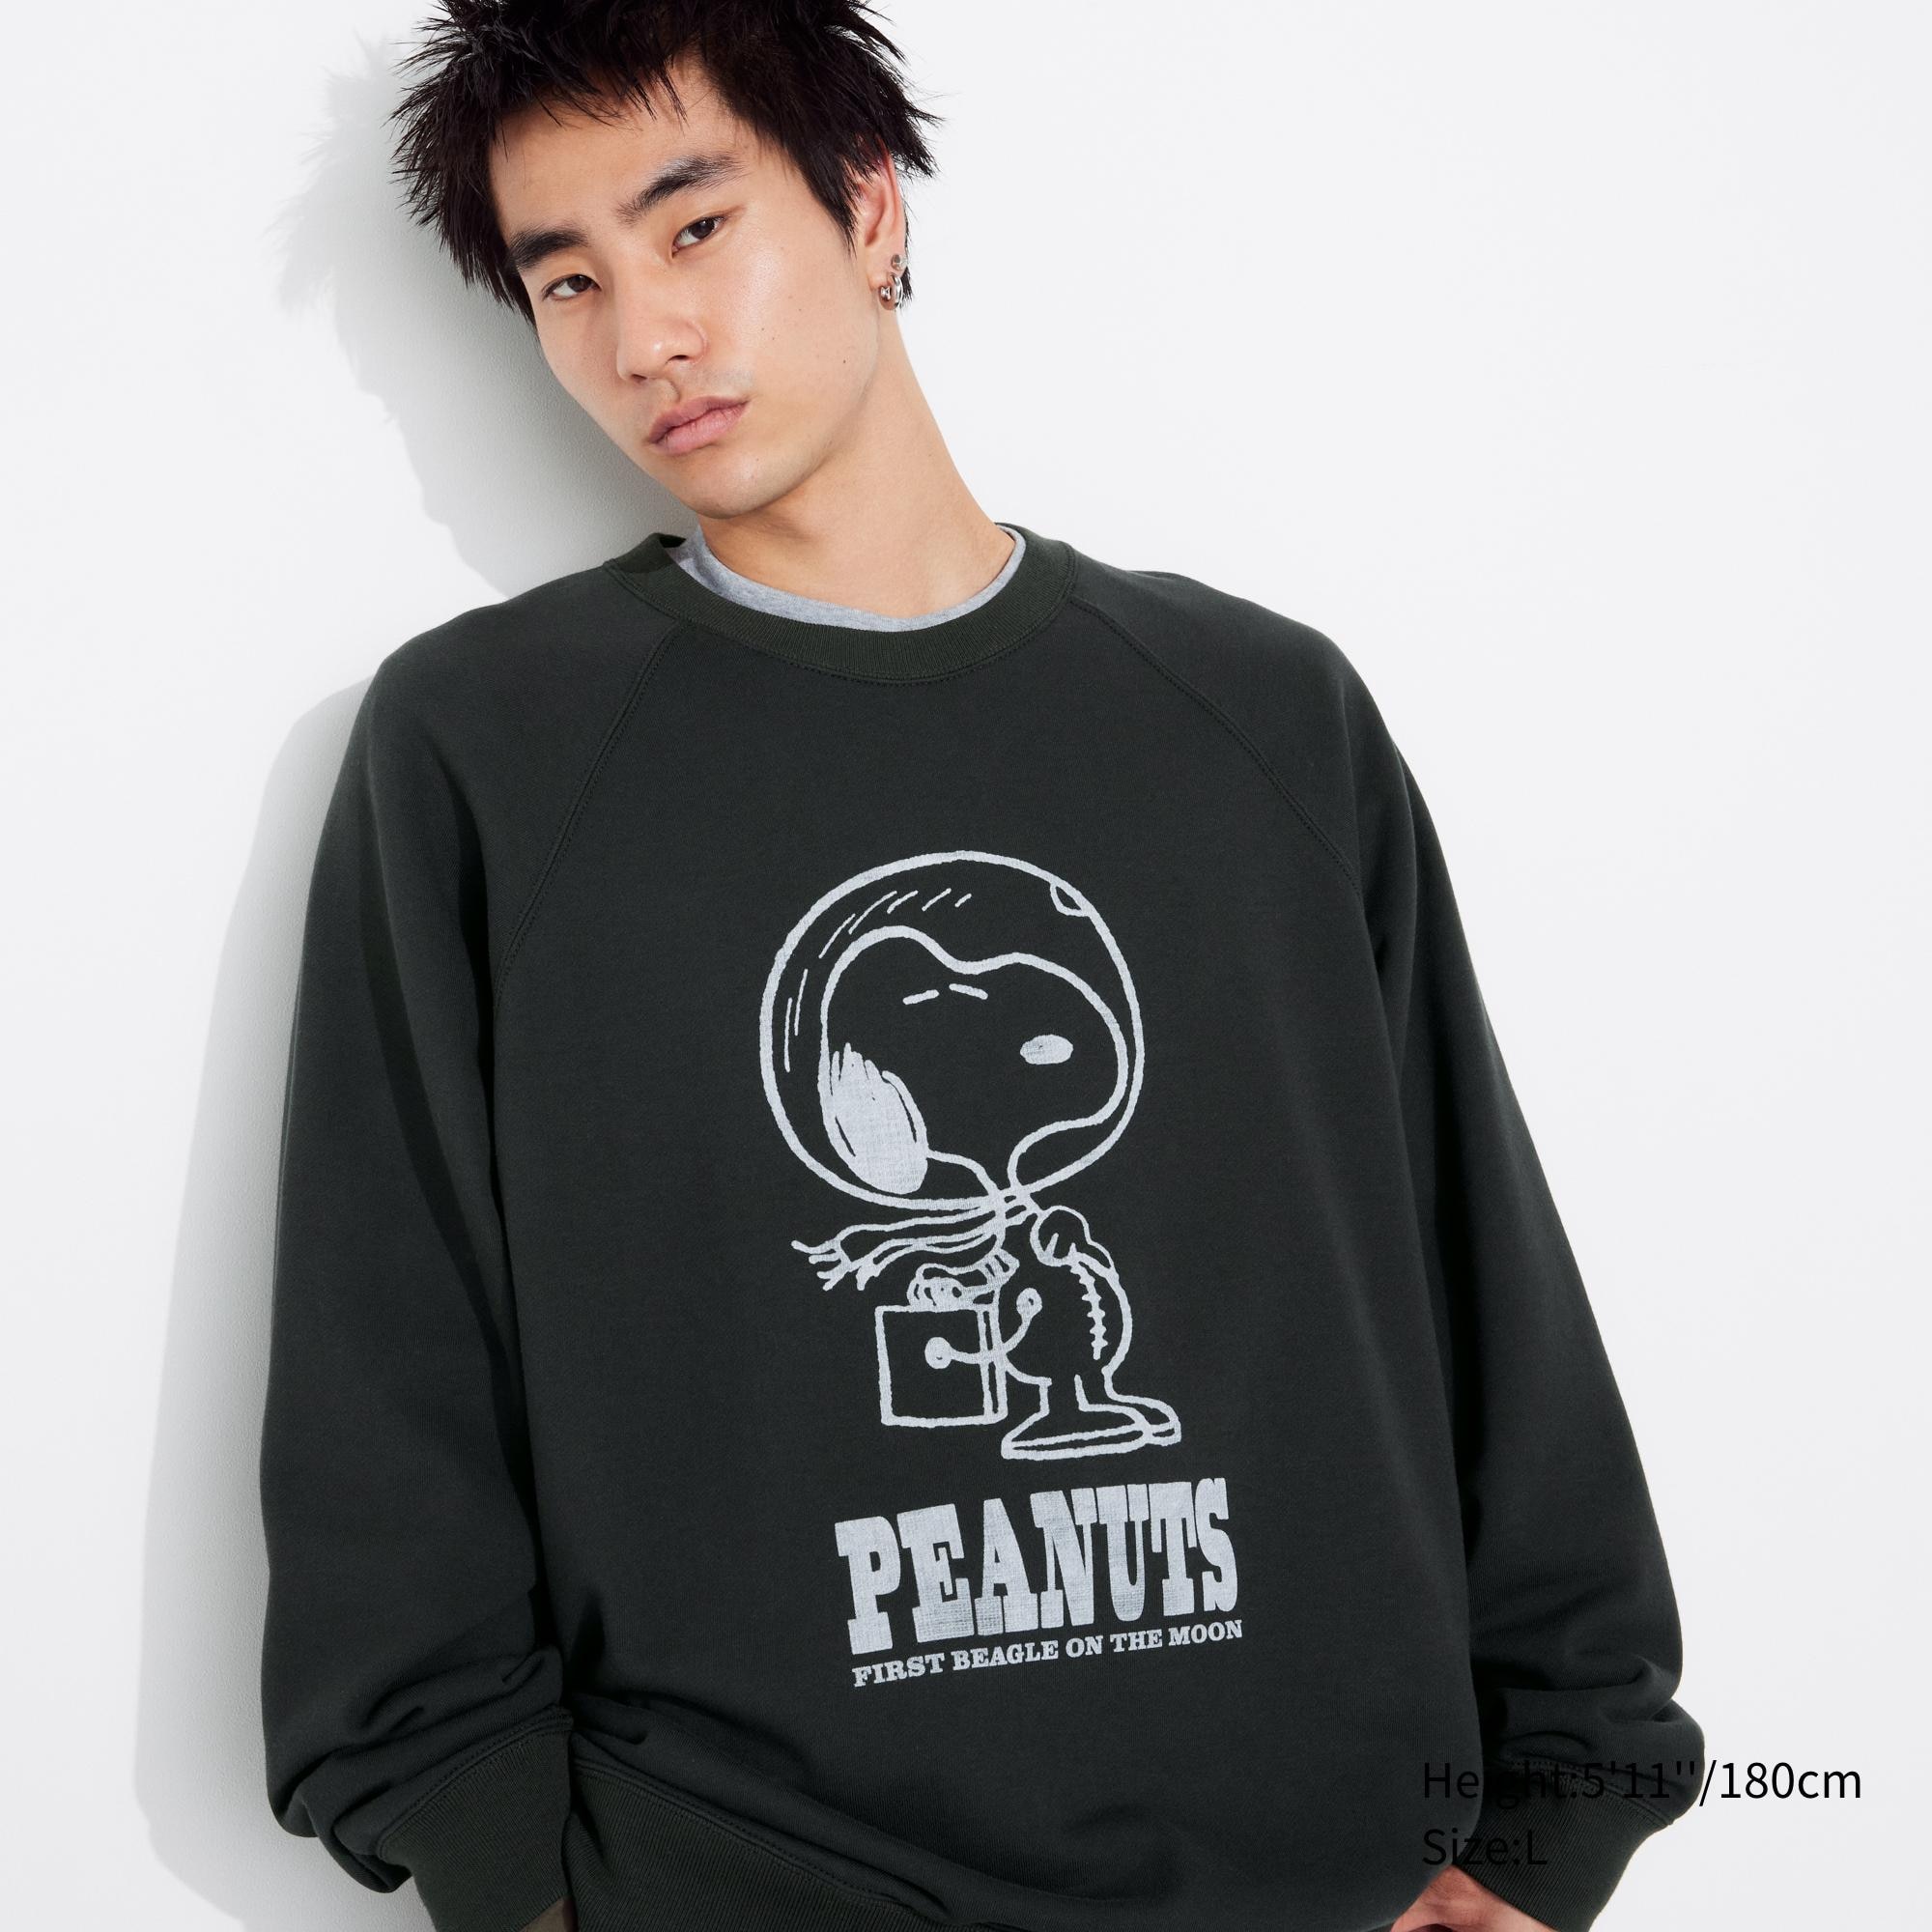 PEANUTS You Can Be Anything! Sweatshirt